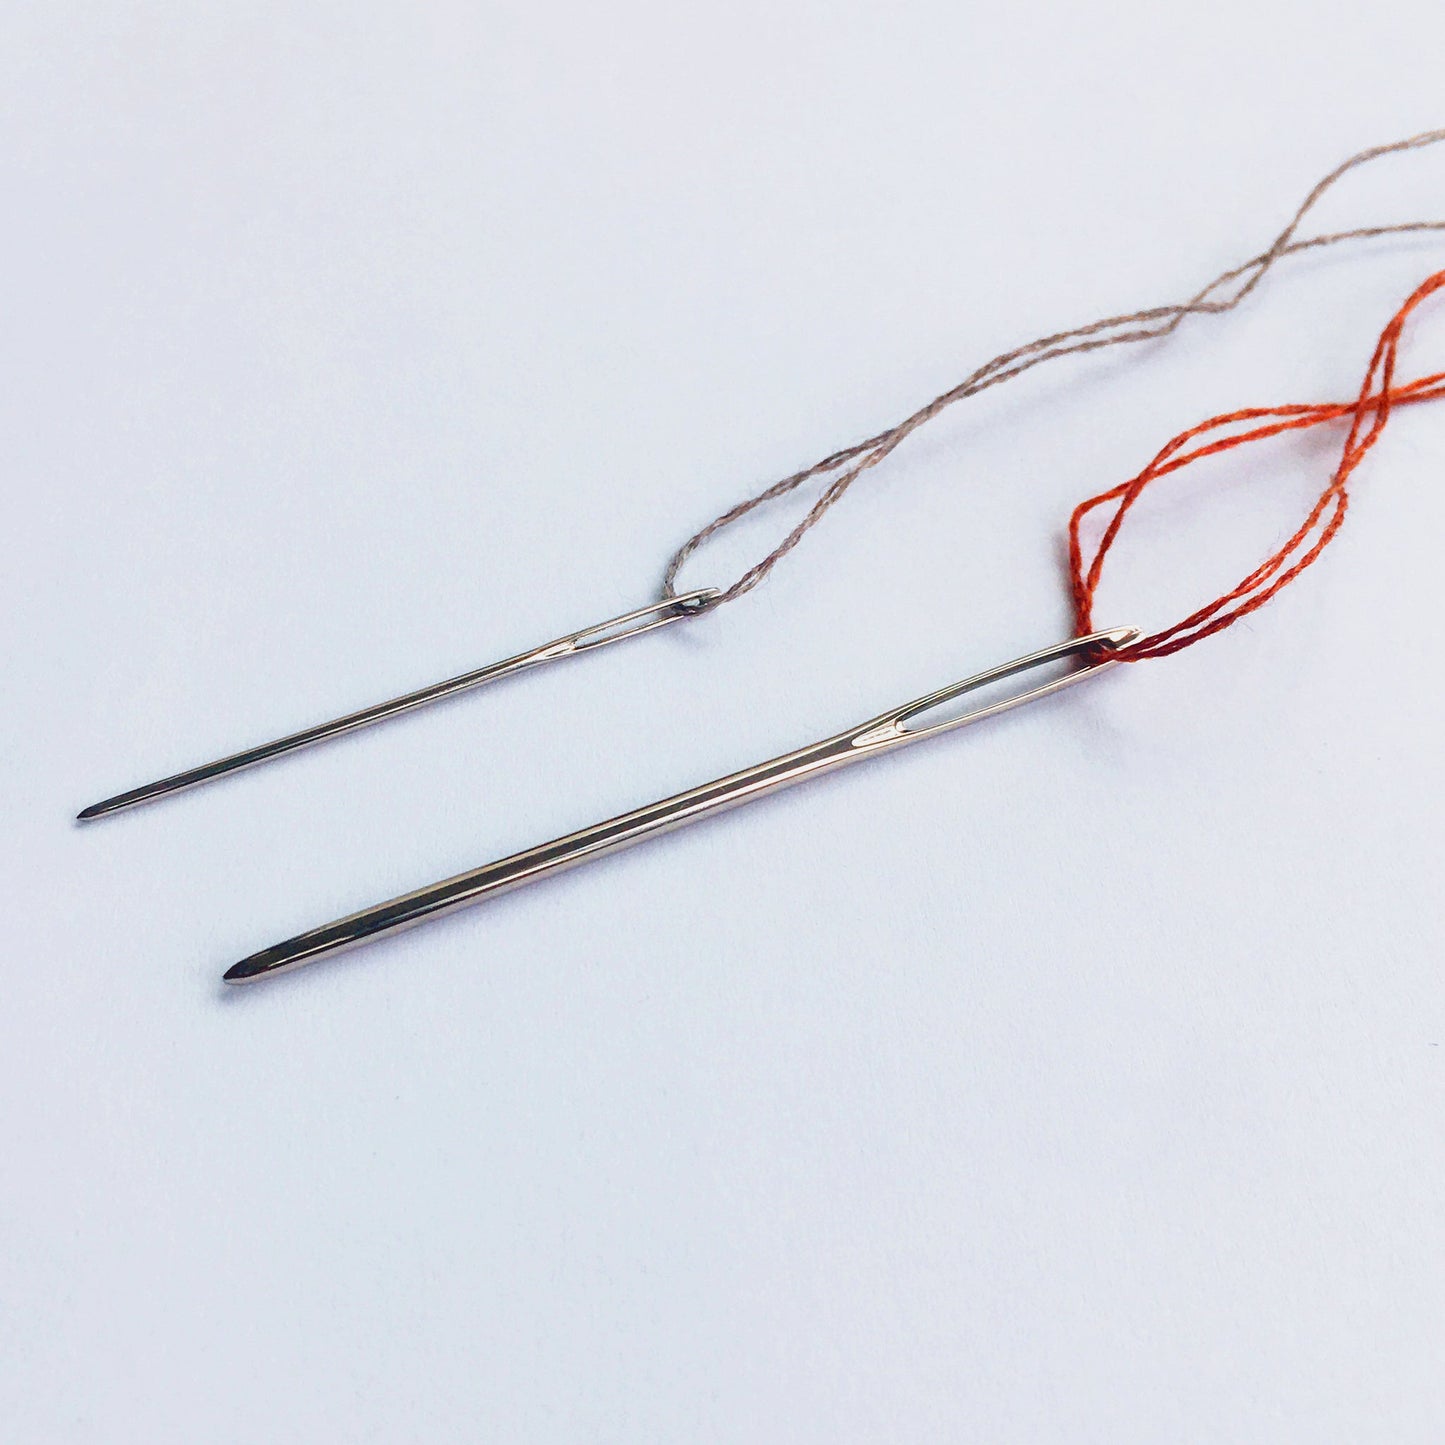 2 Darning needles in 2 sizes. Round tip knitter's needles. Perfect for darning with wool darning yarns.